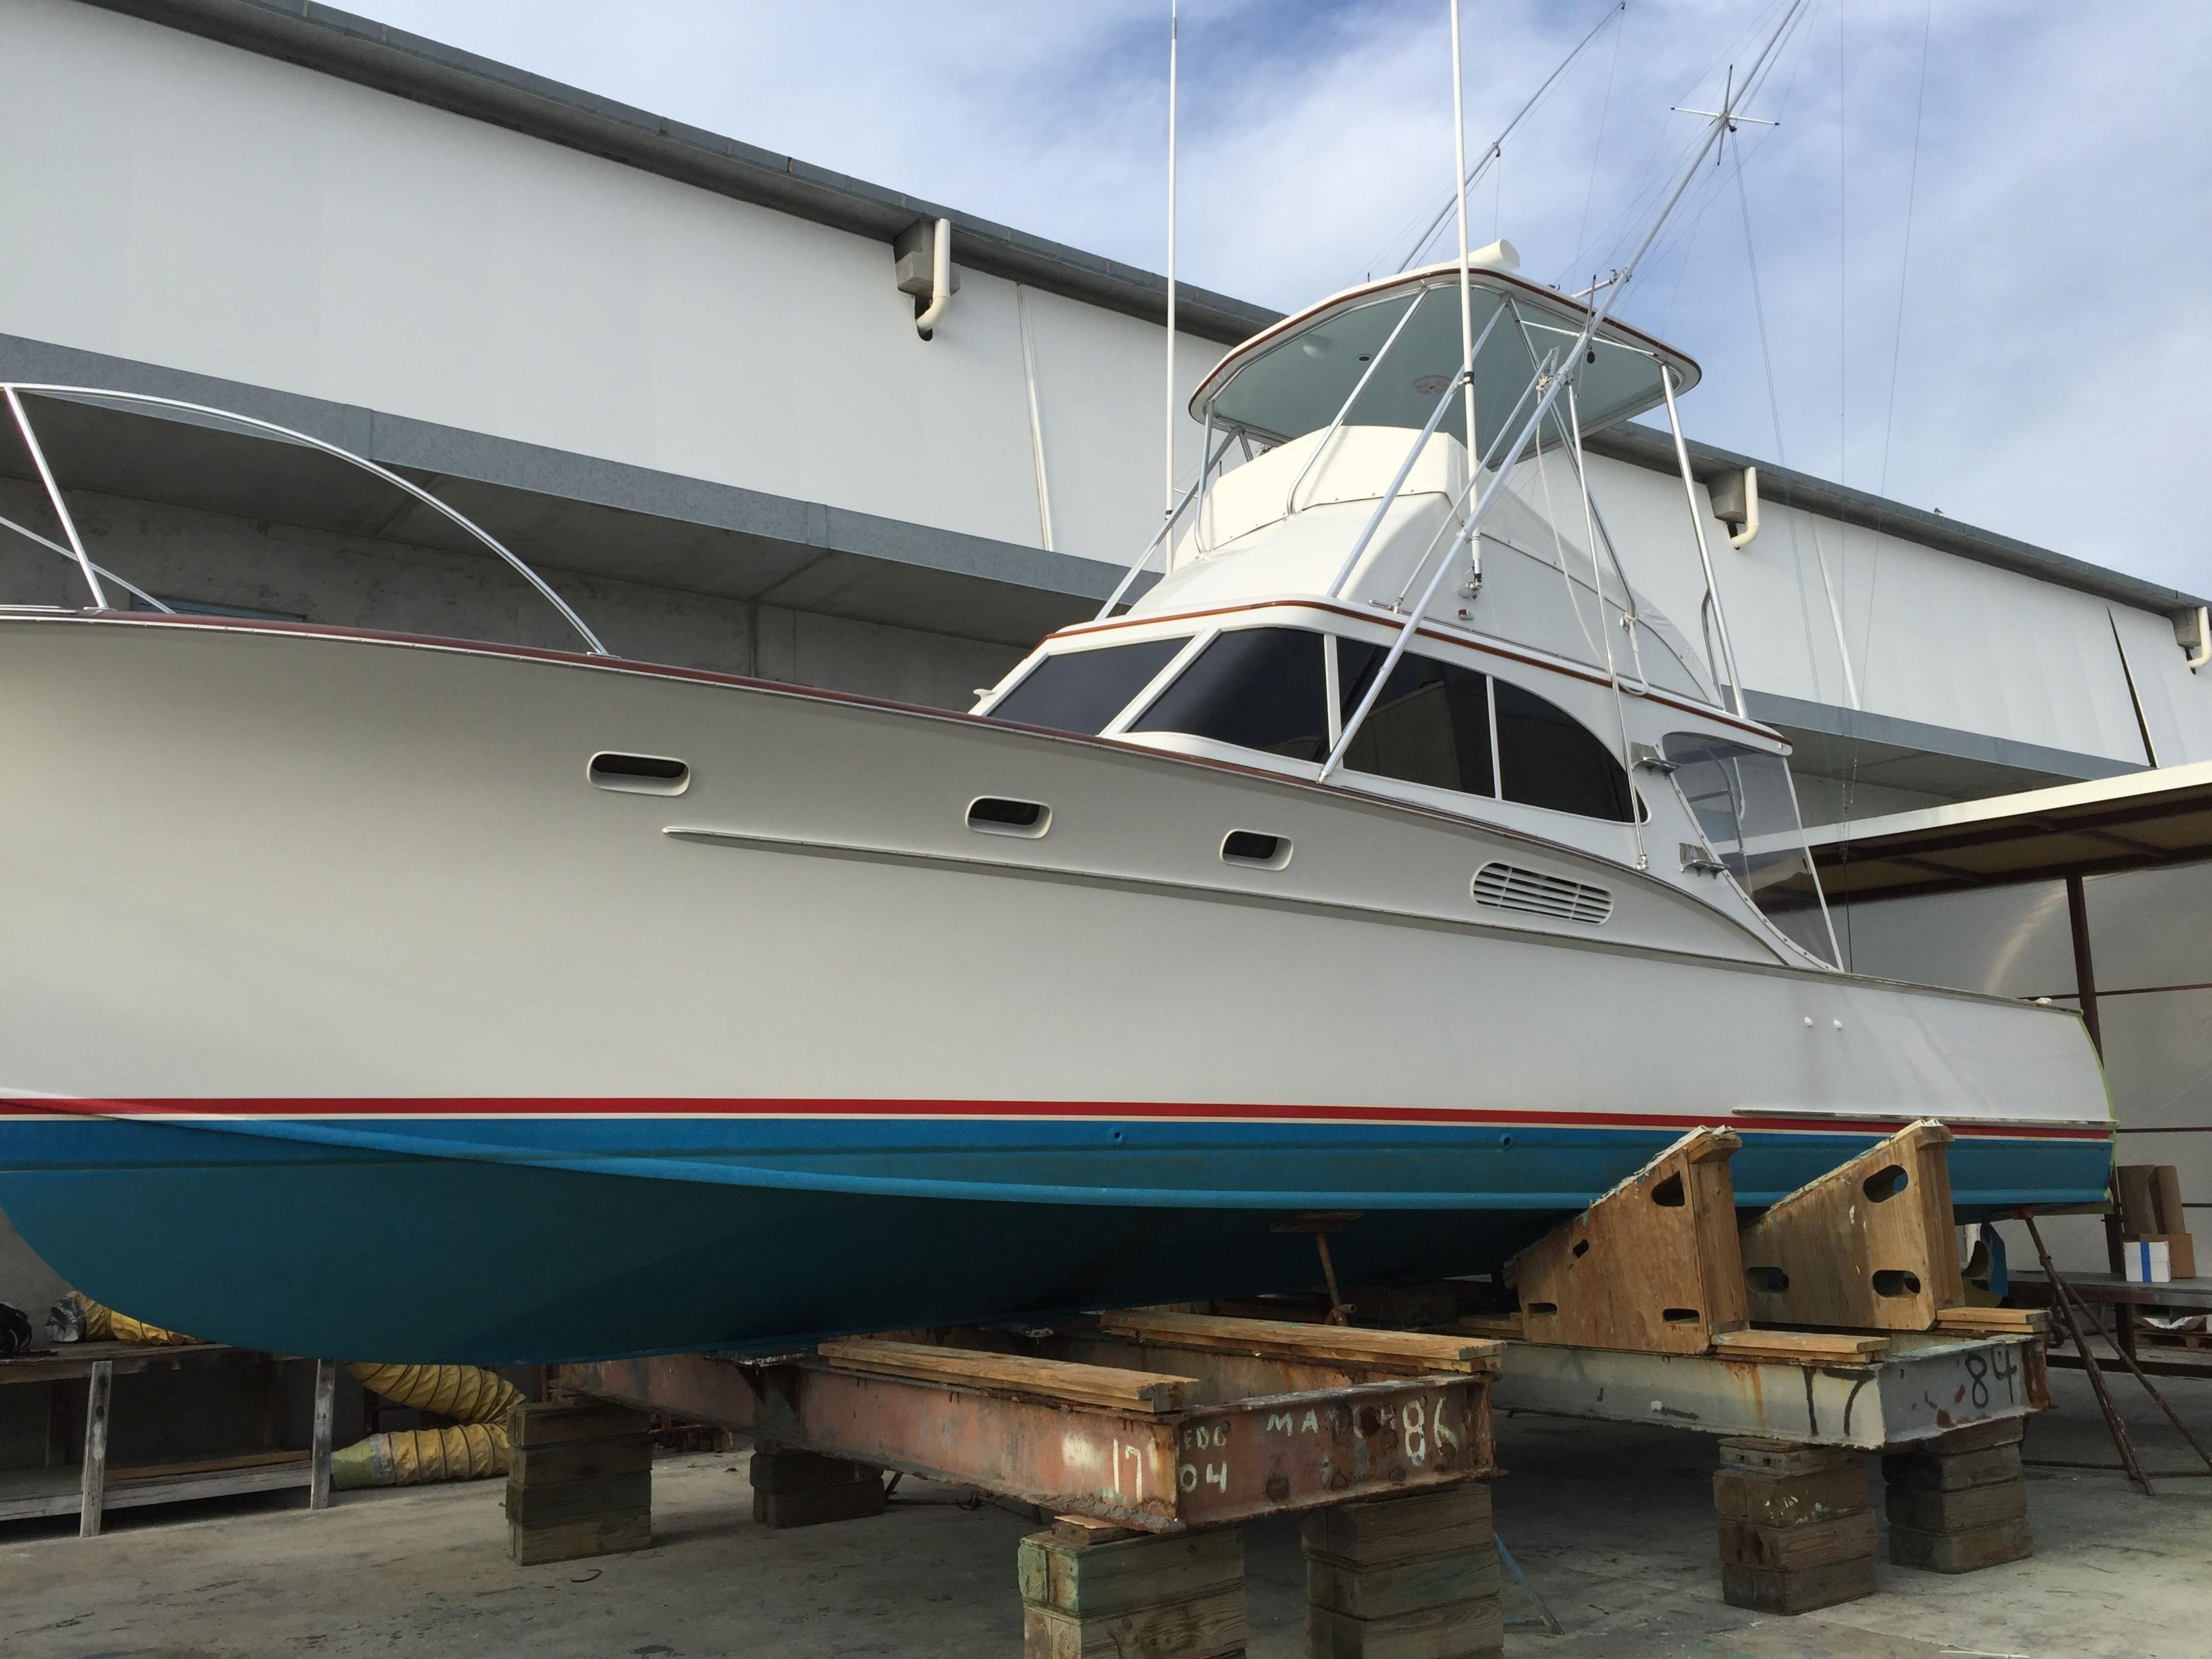 Uncle Jack Yacht for Sale, 37 Rybovich Yachts Pompano Beach, FL